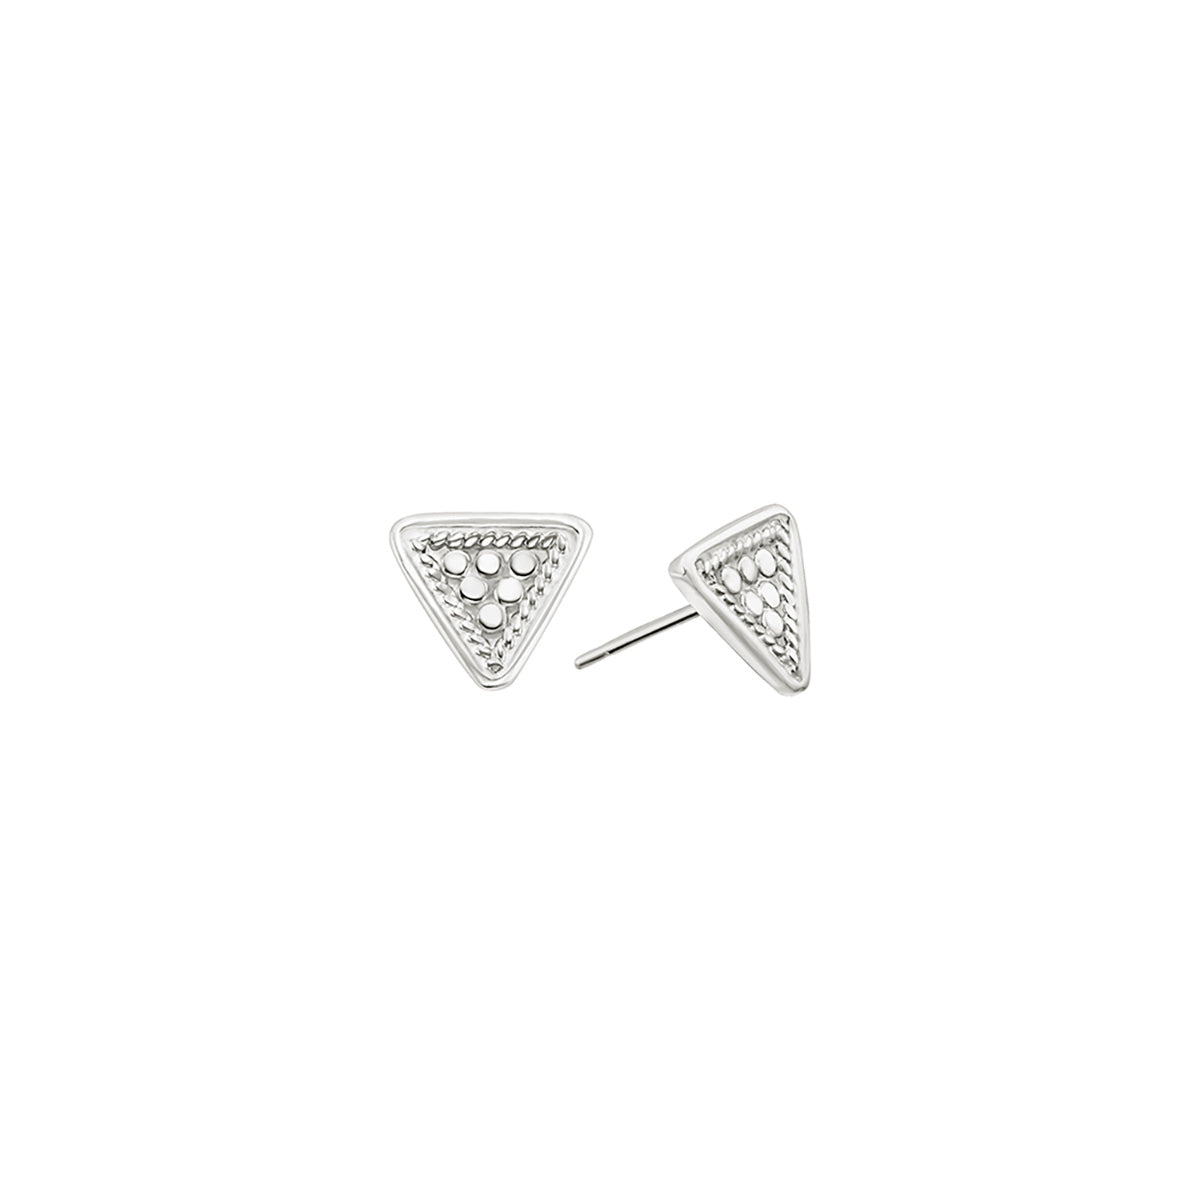 Ana Beck Sterling Silver Triangle Stud Earrings - Silver